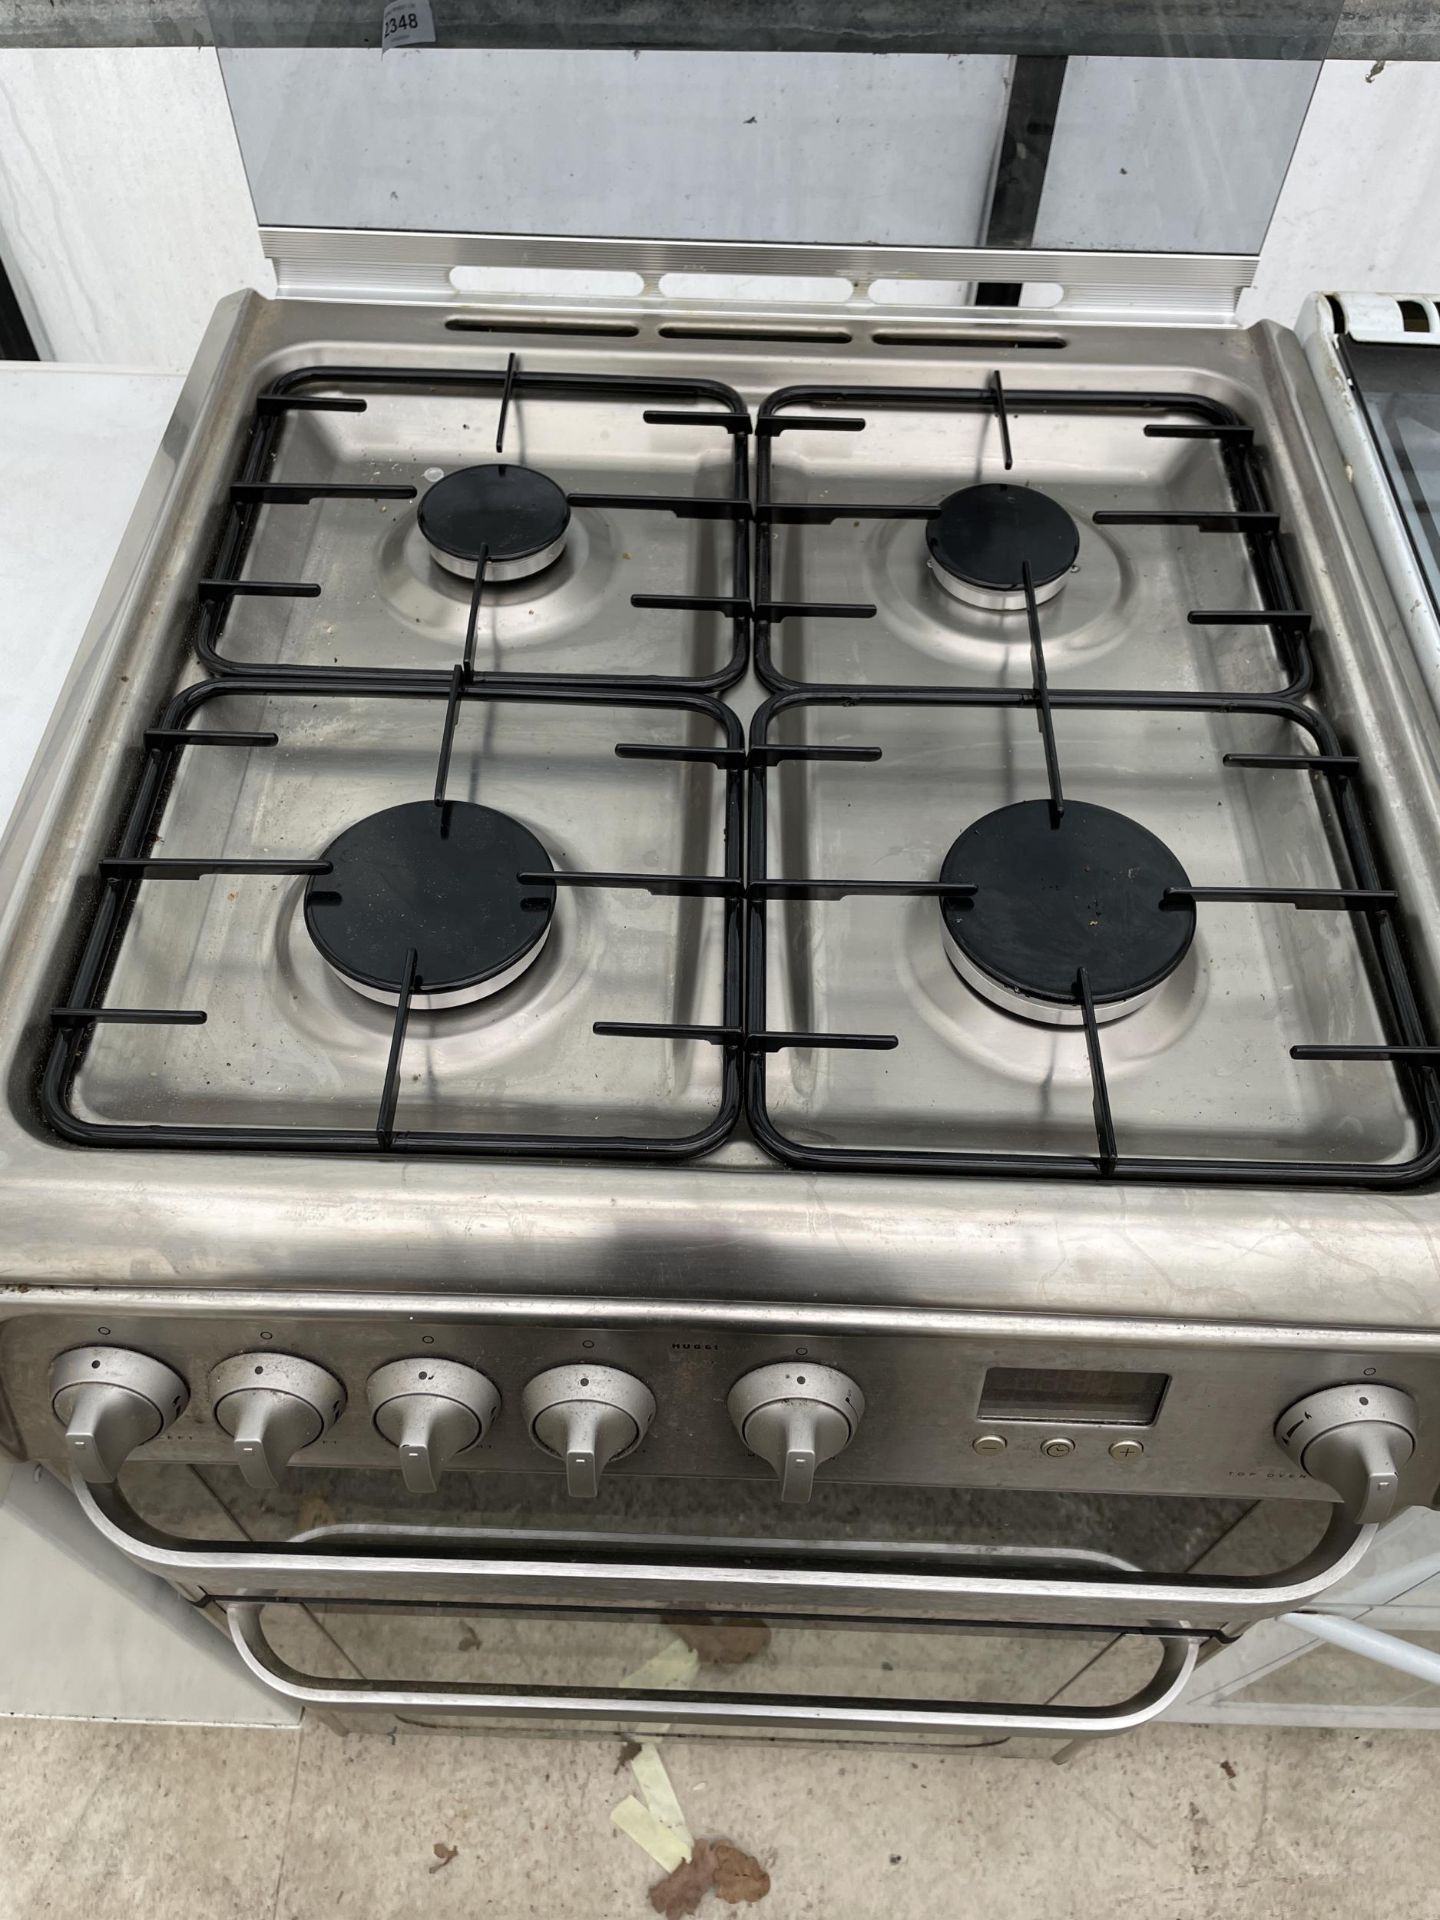 A SILVER HOTPOINT GAS OVEN AND HOB - Image 2 of 4